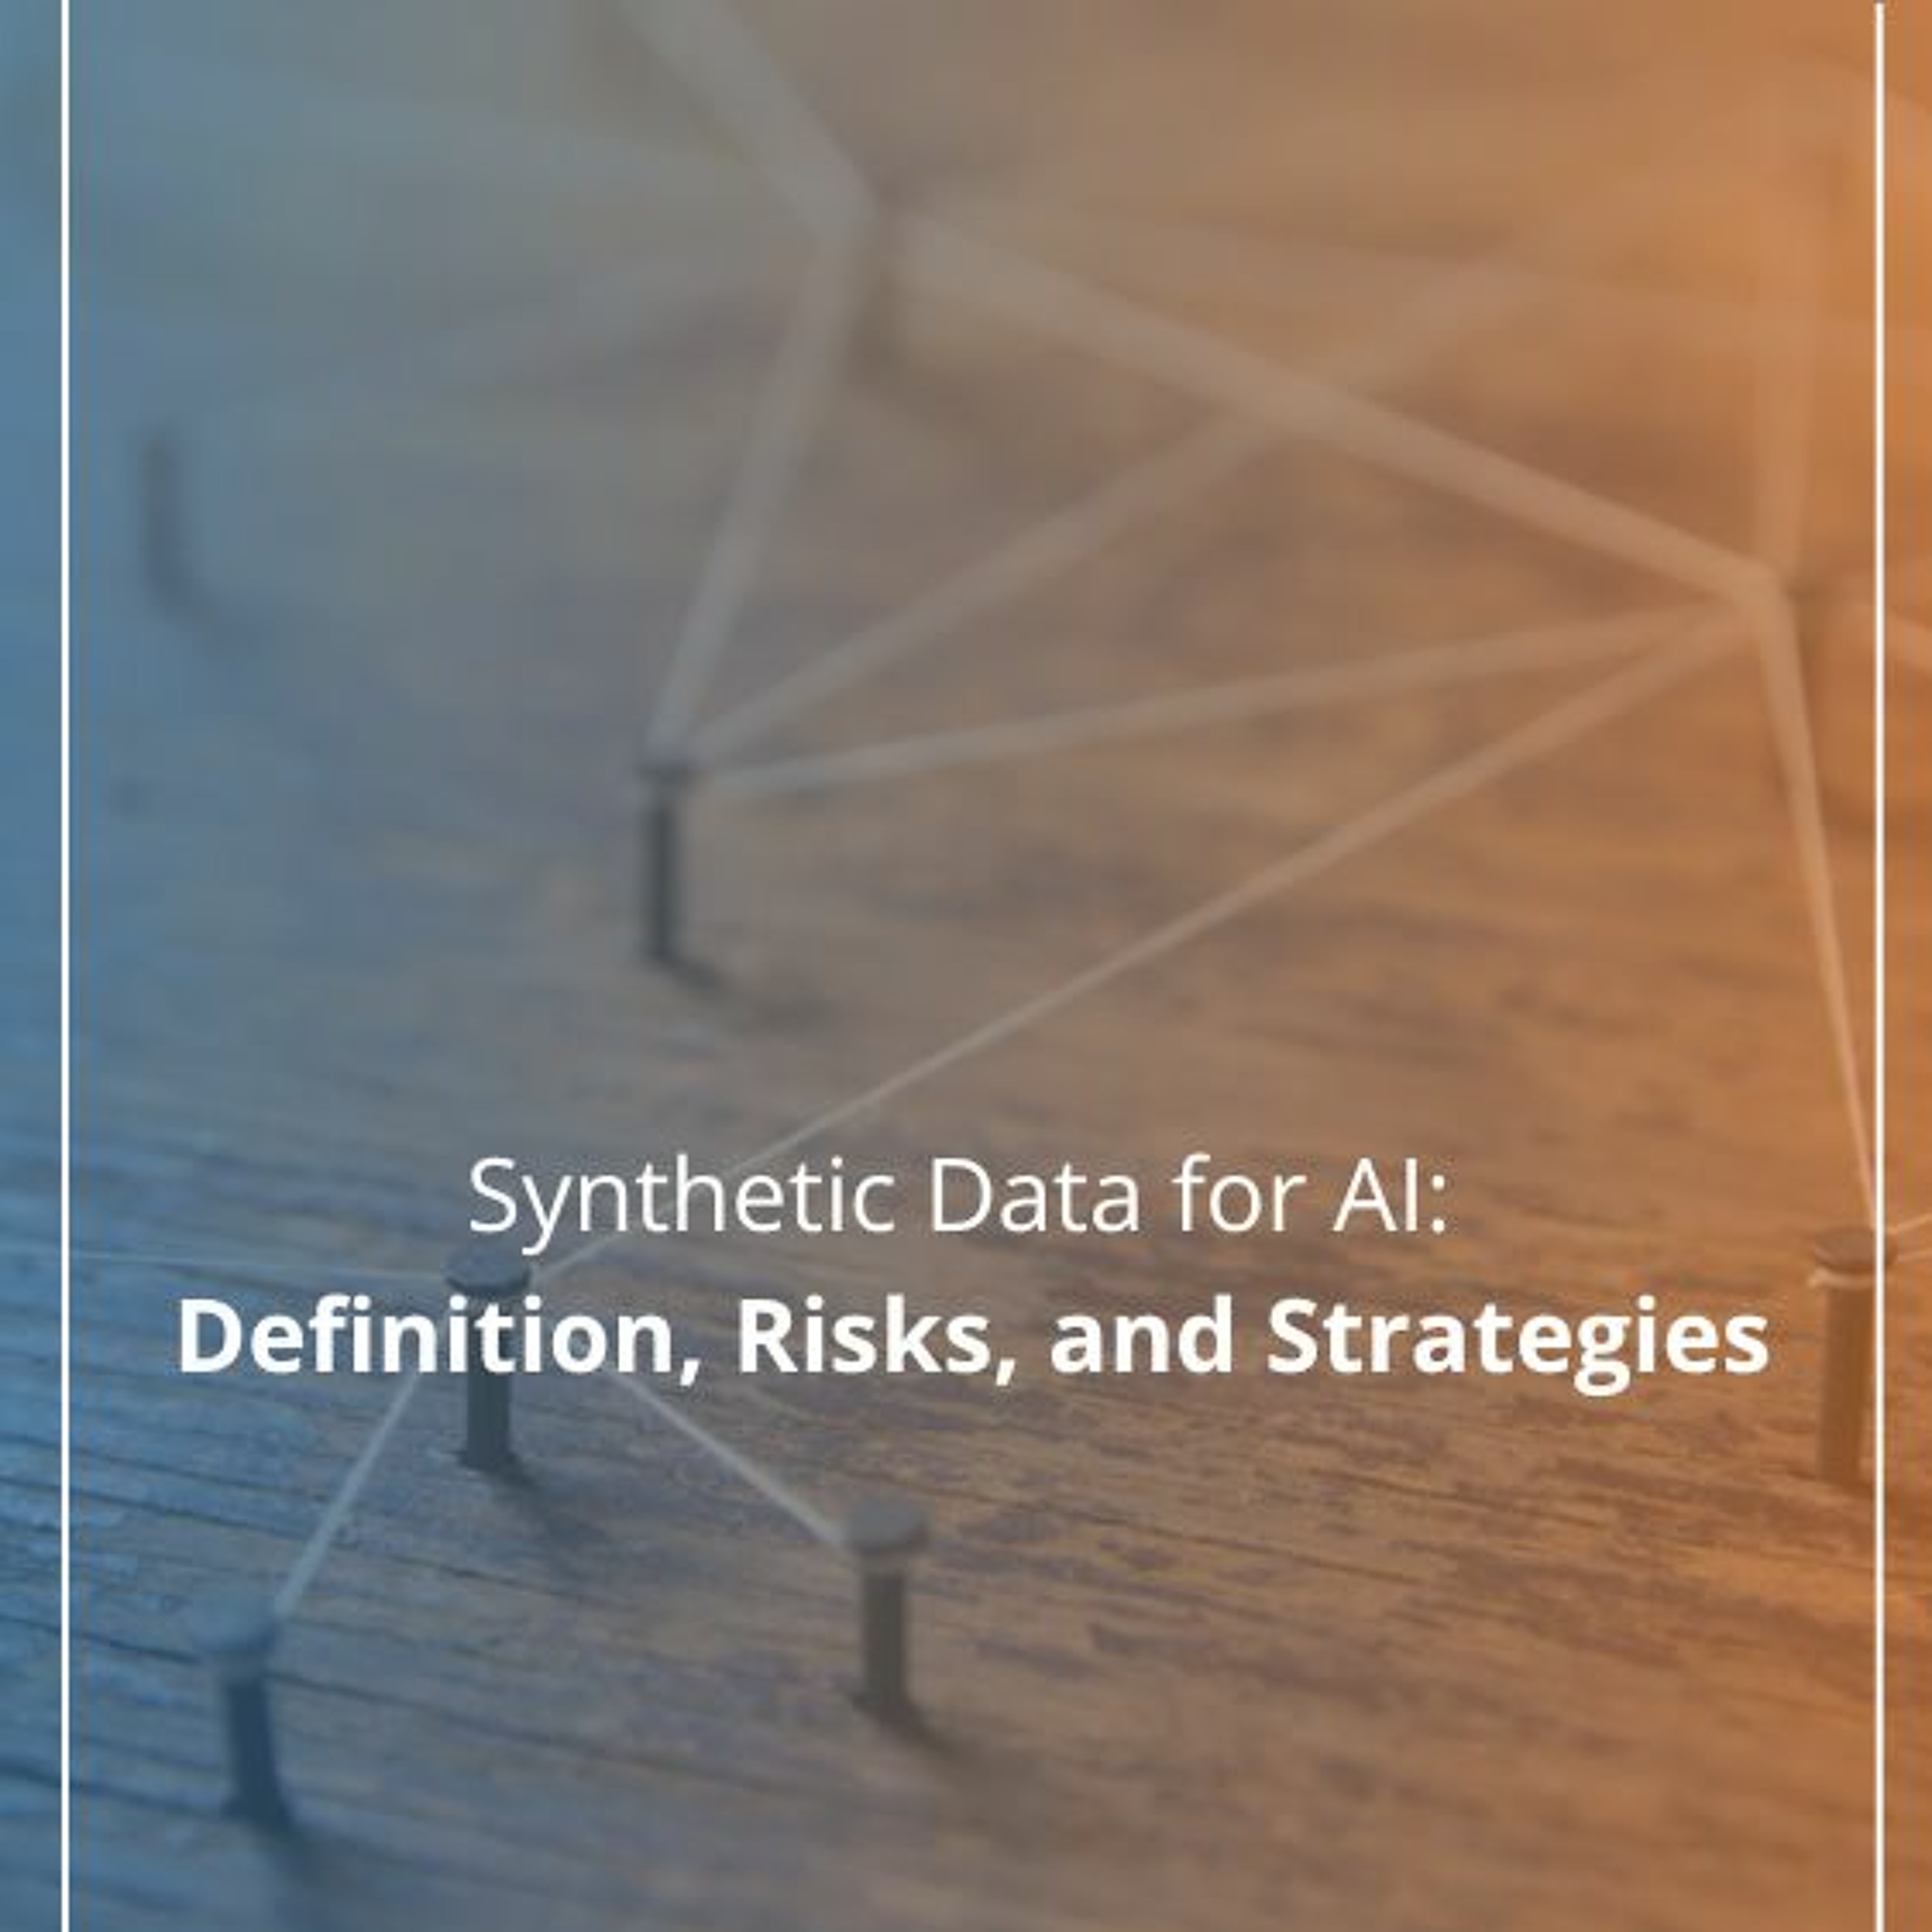 Synthetic Data for AI: Definition, Risks, and Strategies - Audio Blog